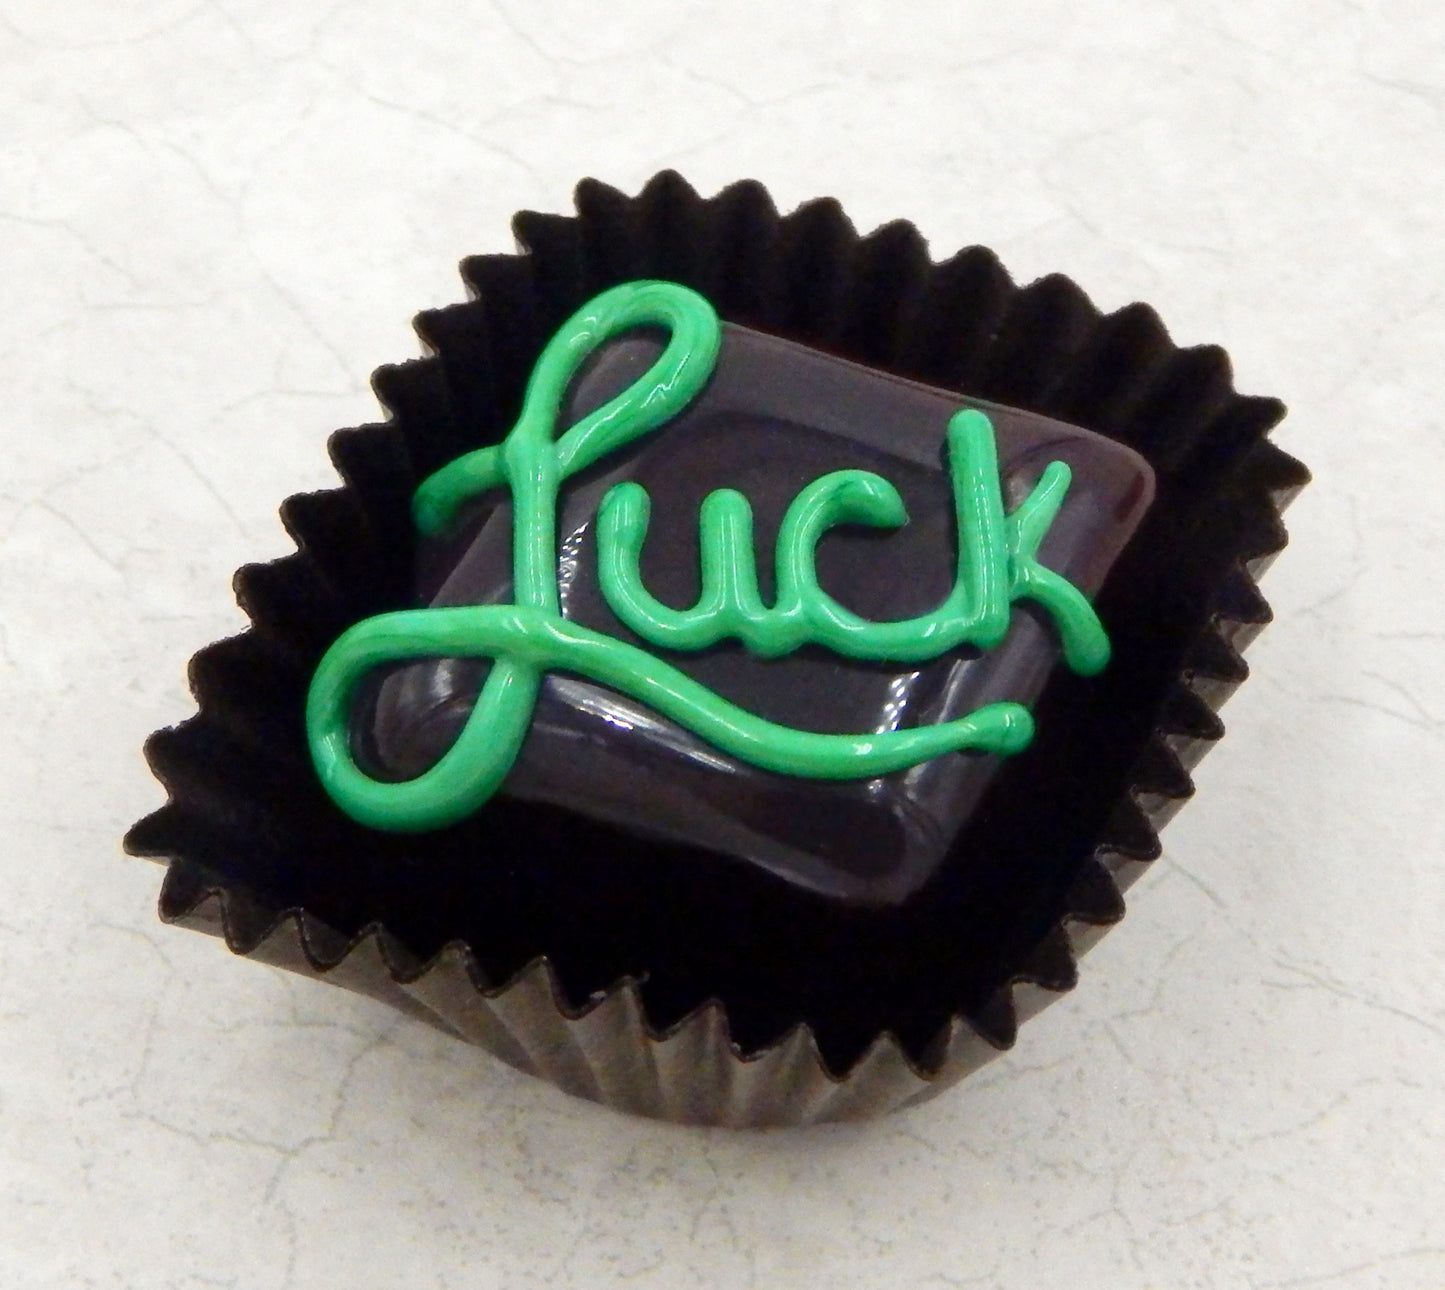 Chocolate with St. Patrick's Day "Luck" (17-080CN)